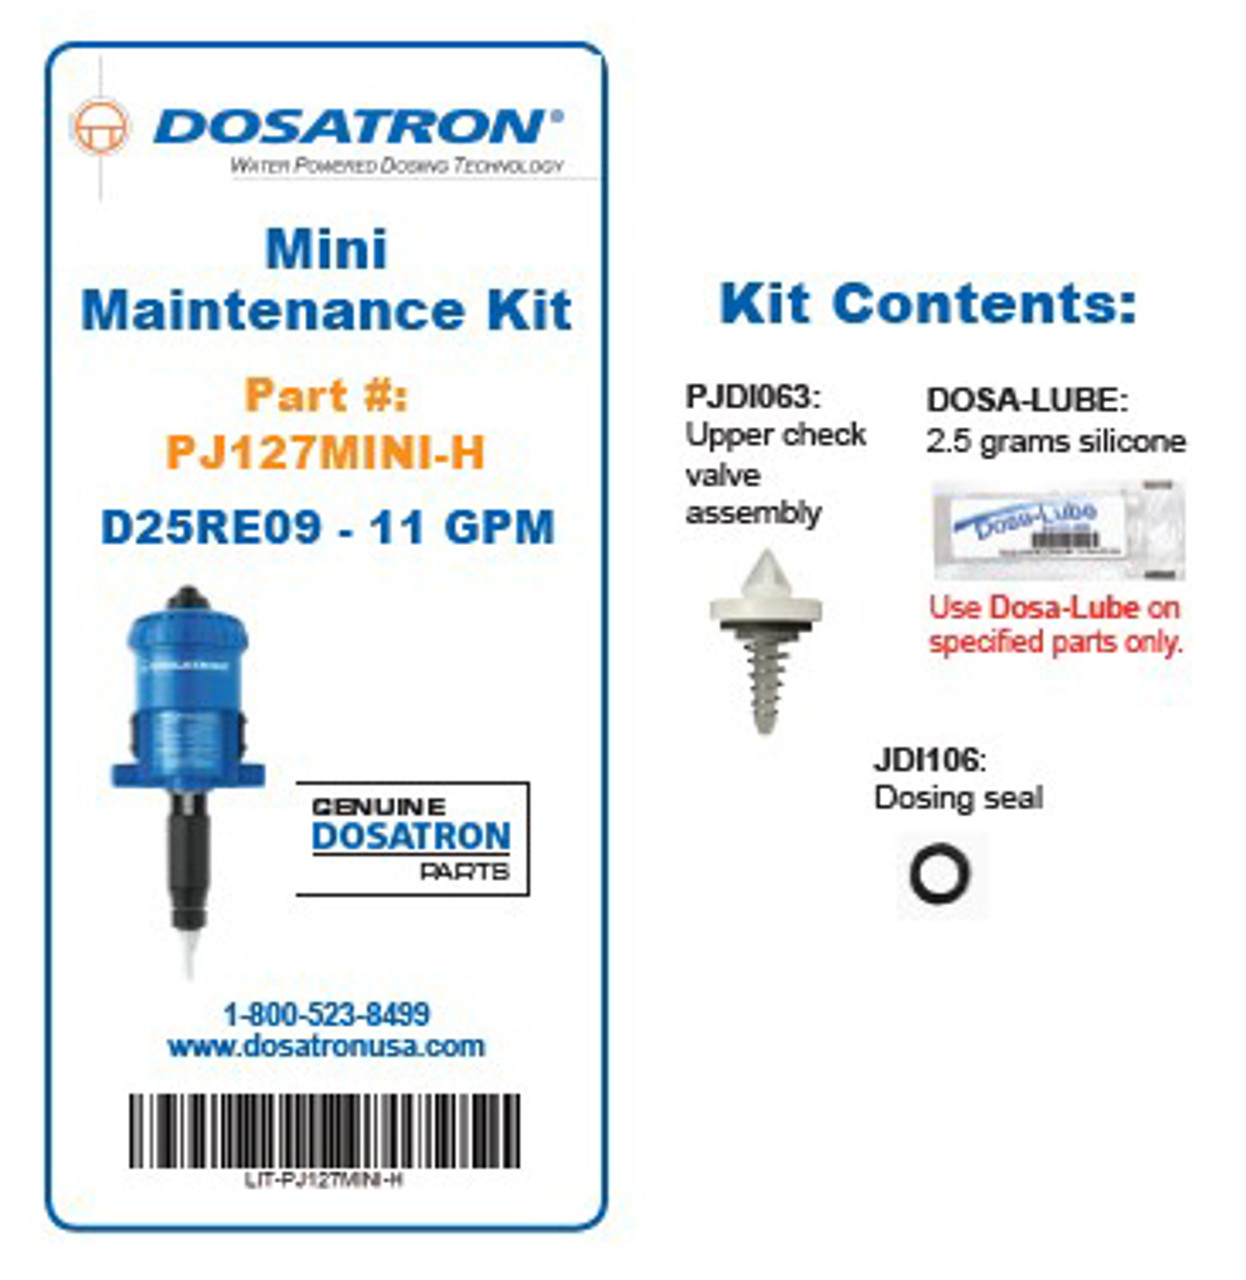 Dosatron Mini Seal Kit for Water Powered Doser 11 GPM 1:1000 to 1:112